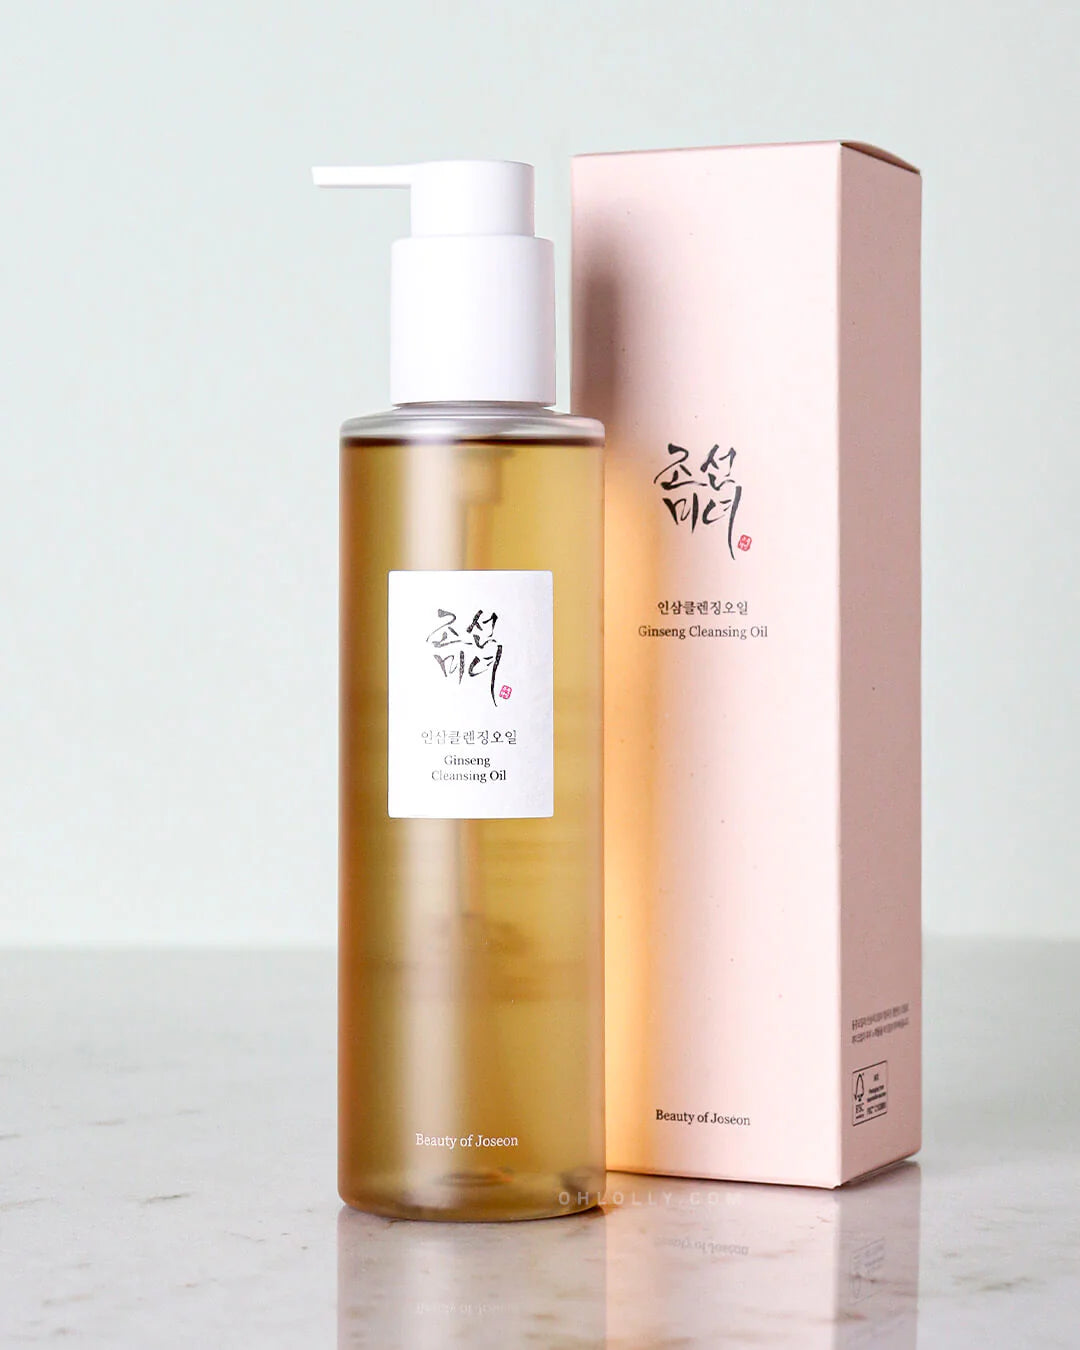 GINSENG CLEANSING OIL